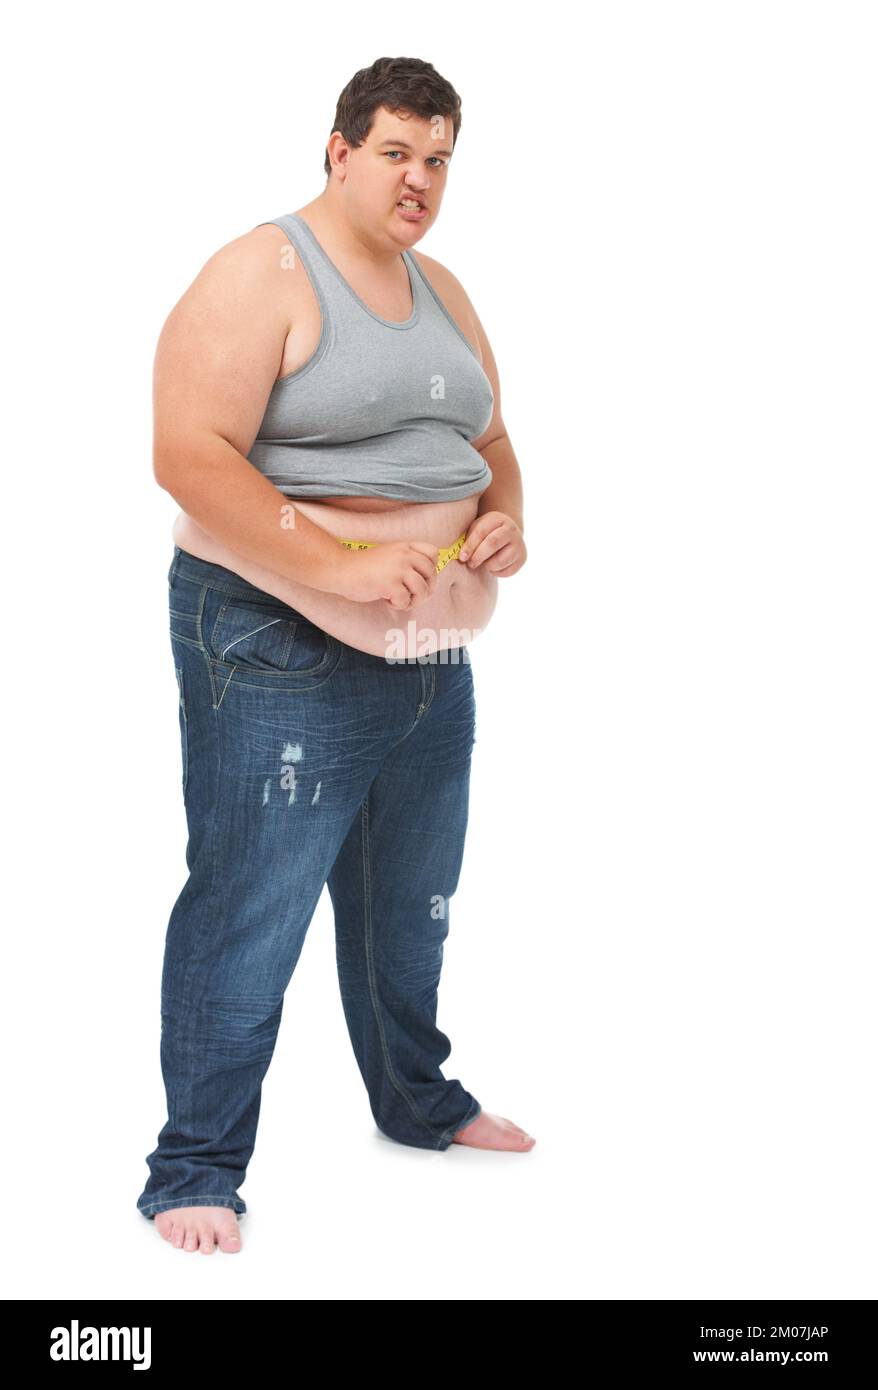 Not the result he wanted. Portrait of an obese young man measuring his waist with a measuring tape against a white background. Stock Photo